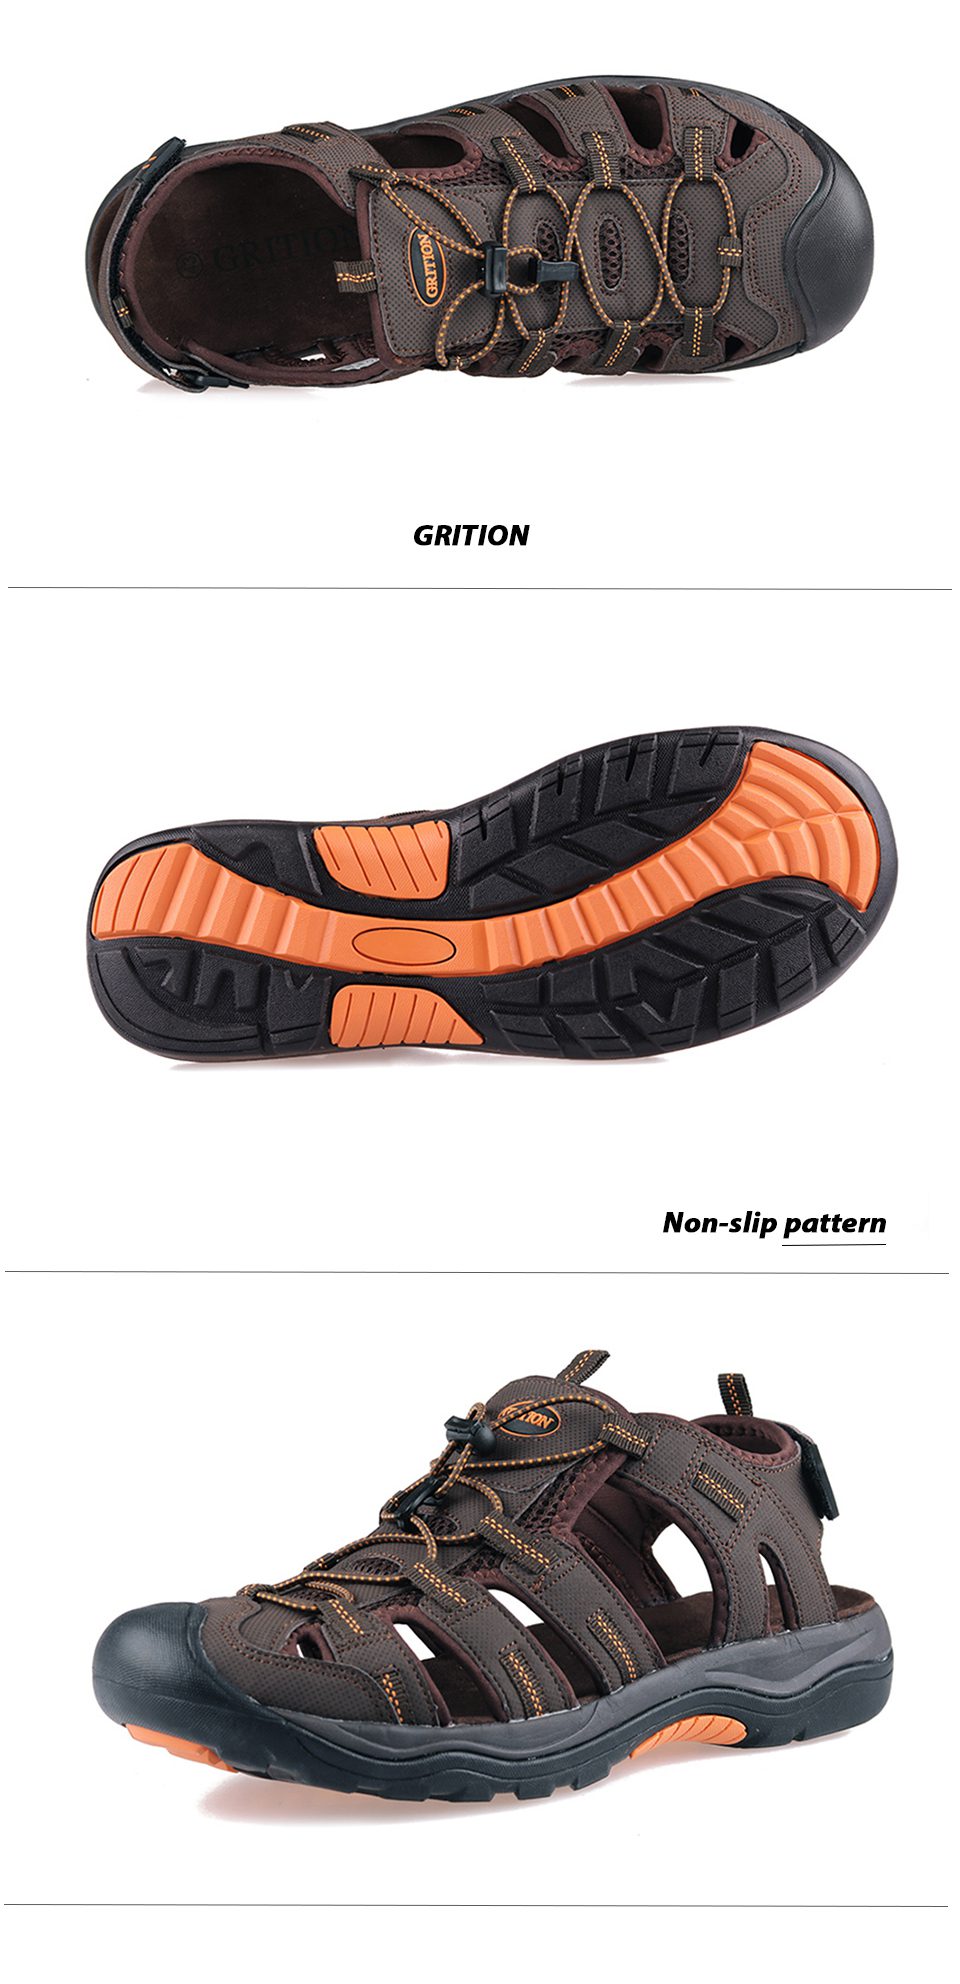 GRITION Men Sandals Summer Close Toe Beach Clog Flat Outdoor Casual Native Shoes PU Leather Luxury 2021 Fashion Flip Flops New